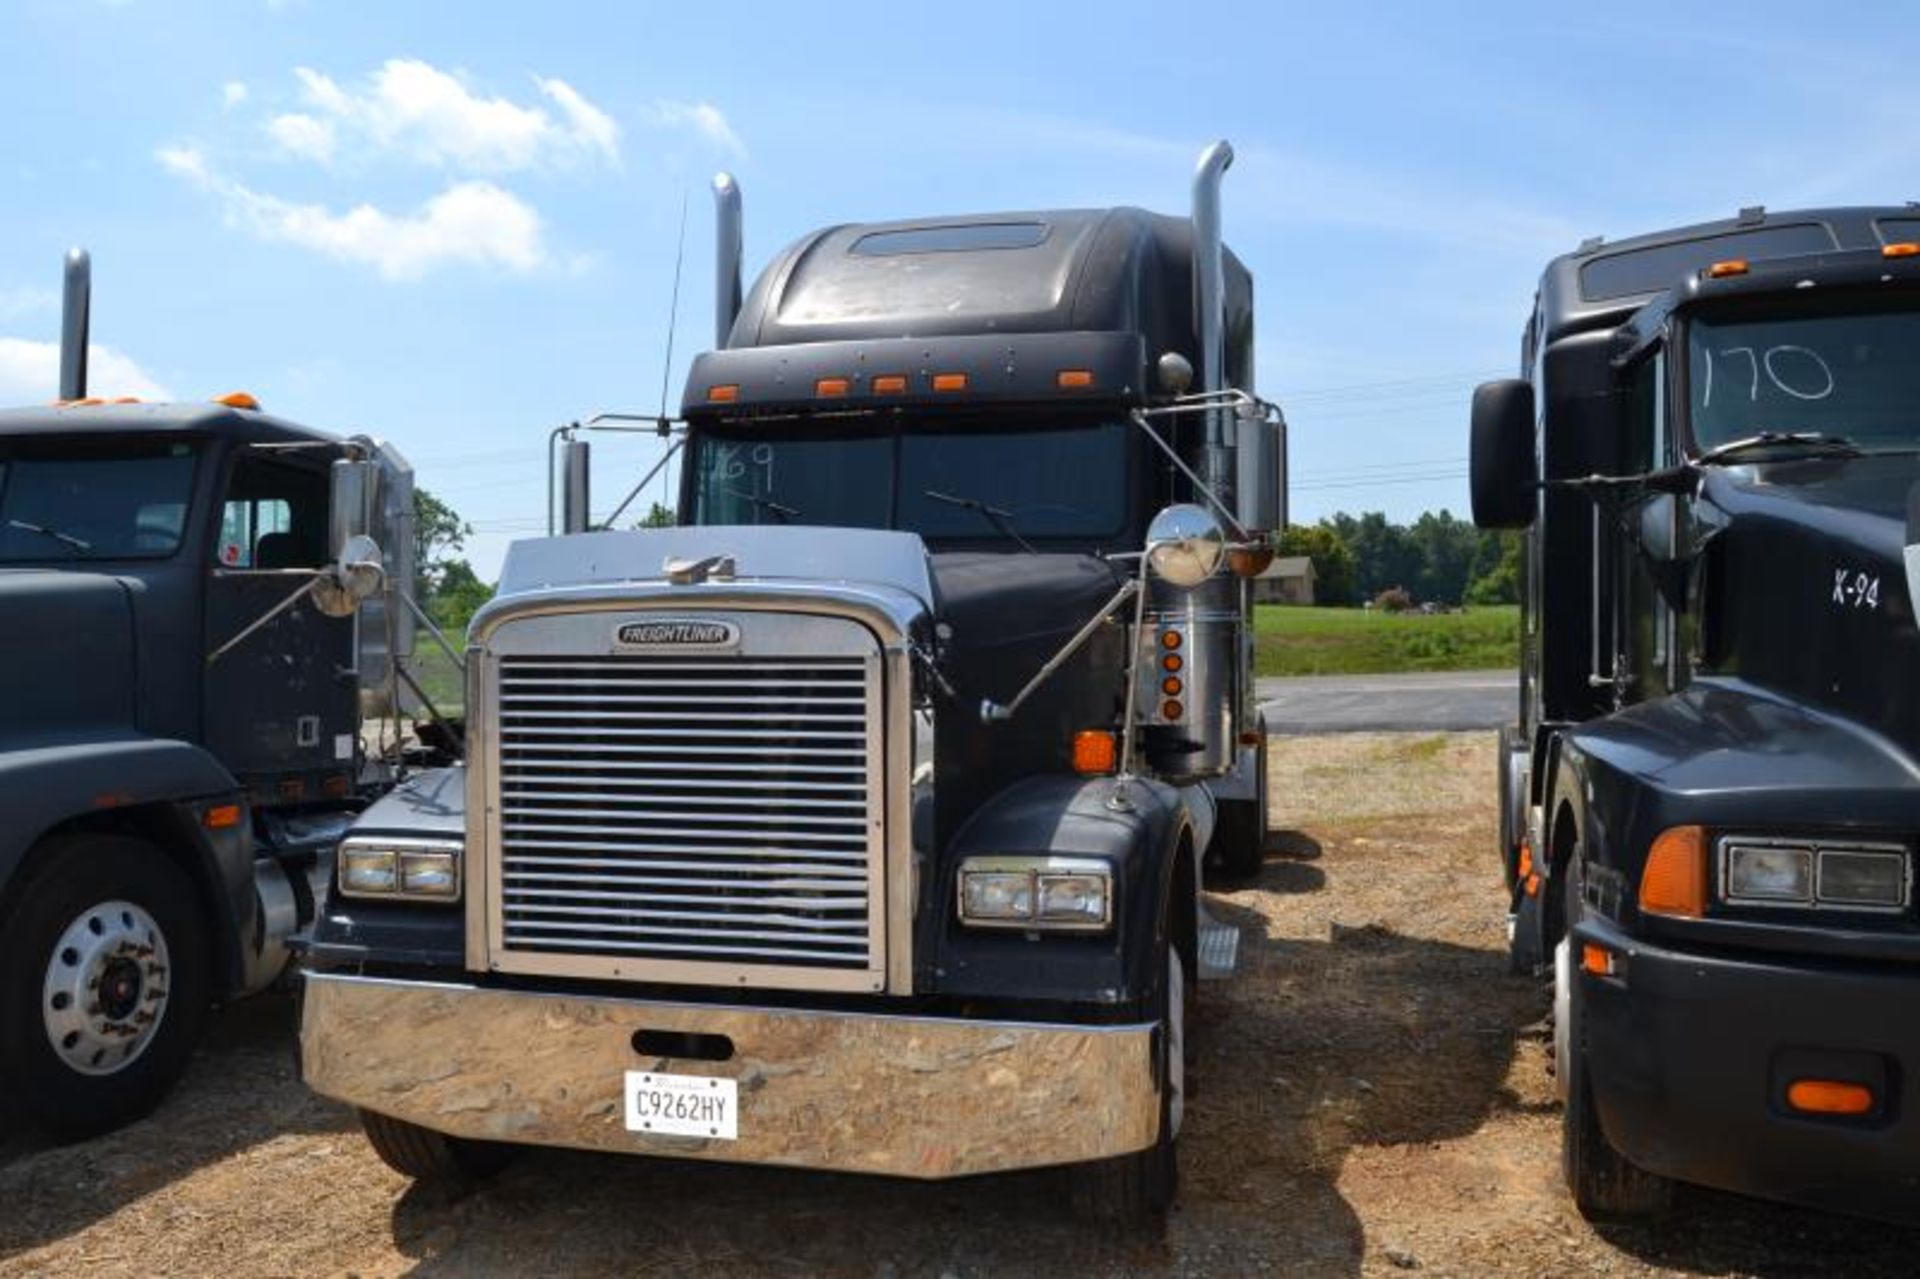 1997 FREIGHTLINER ROAD TRACTOR W/ SLEEPER W/ CAT ENGINE W/ 13 SPEED TRANS W/ AIR RIDE 1044060 MILES - Image 2 of 3